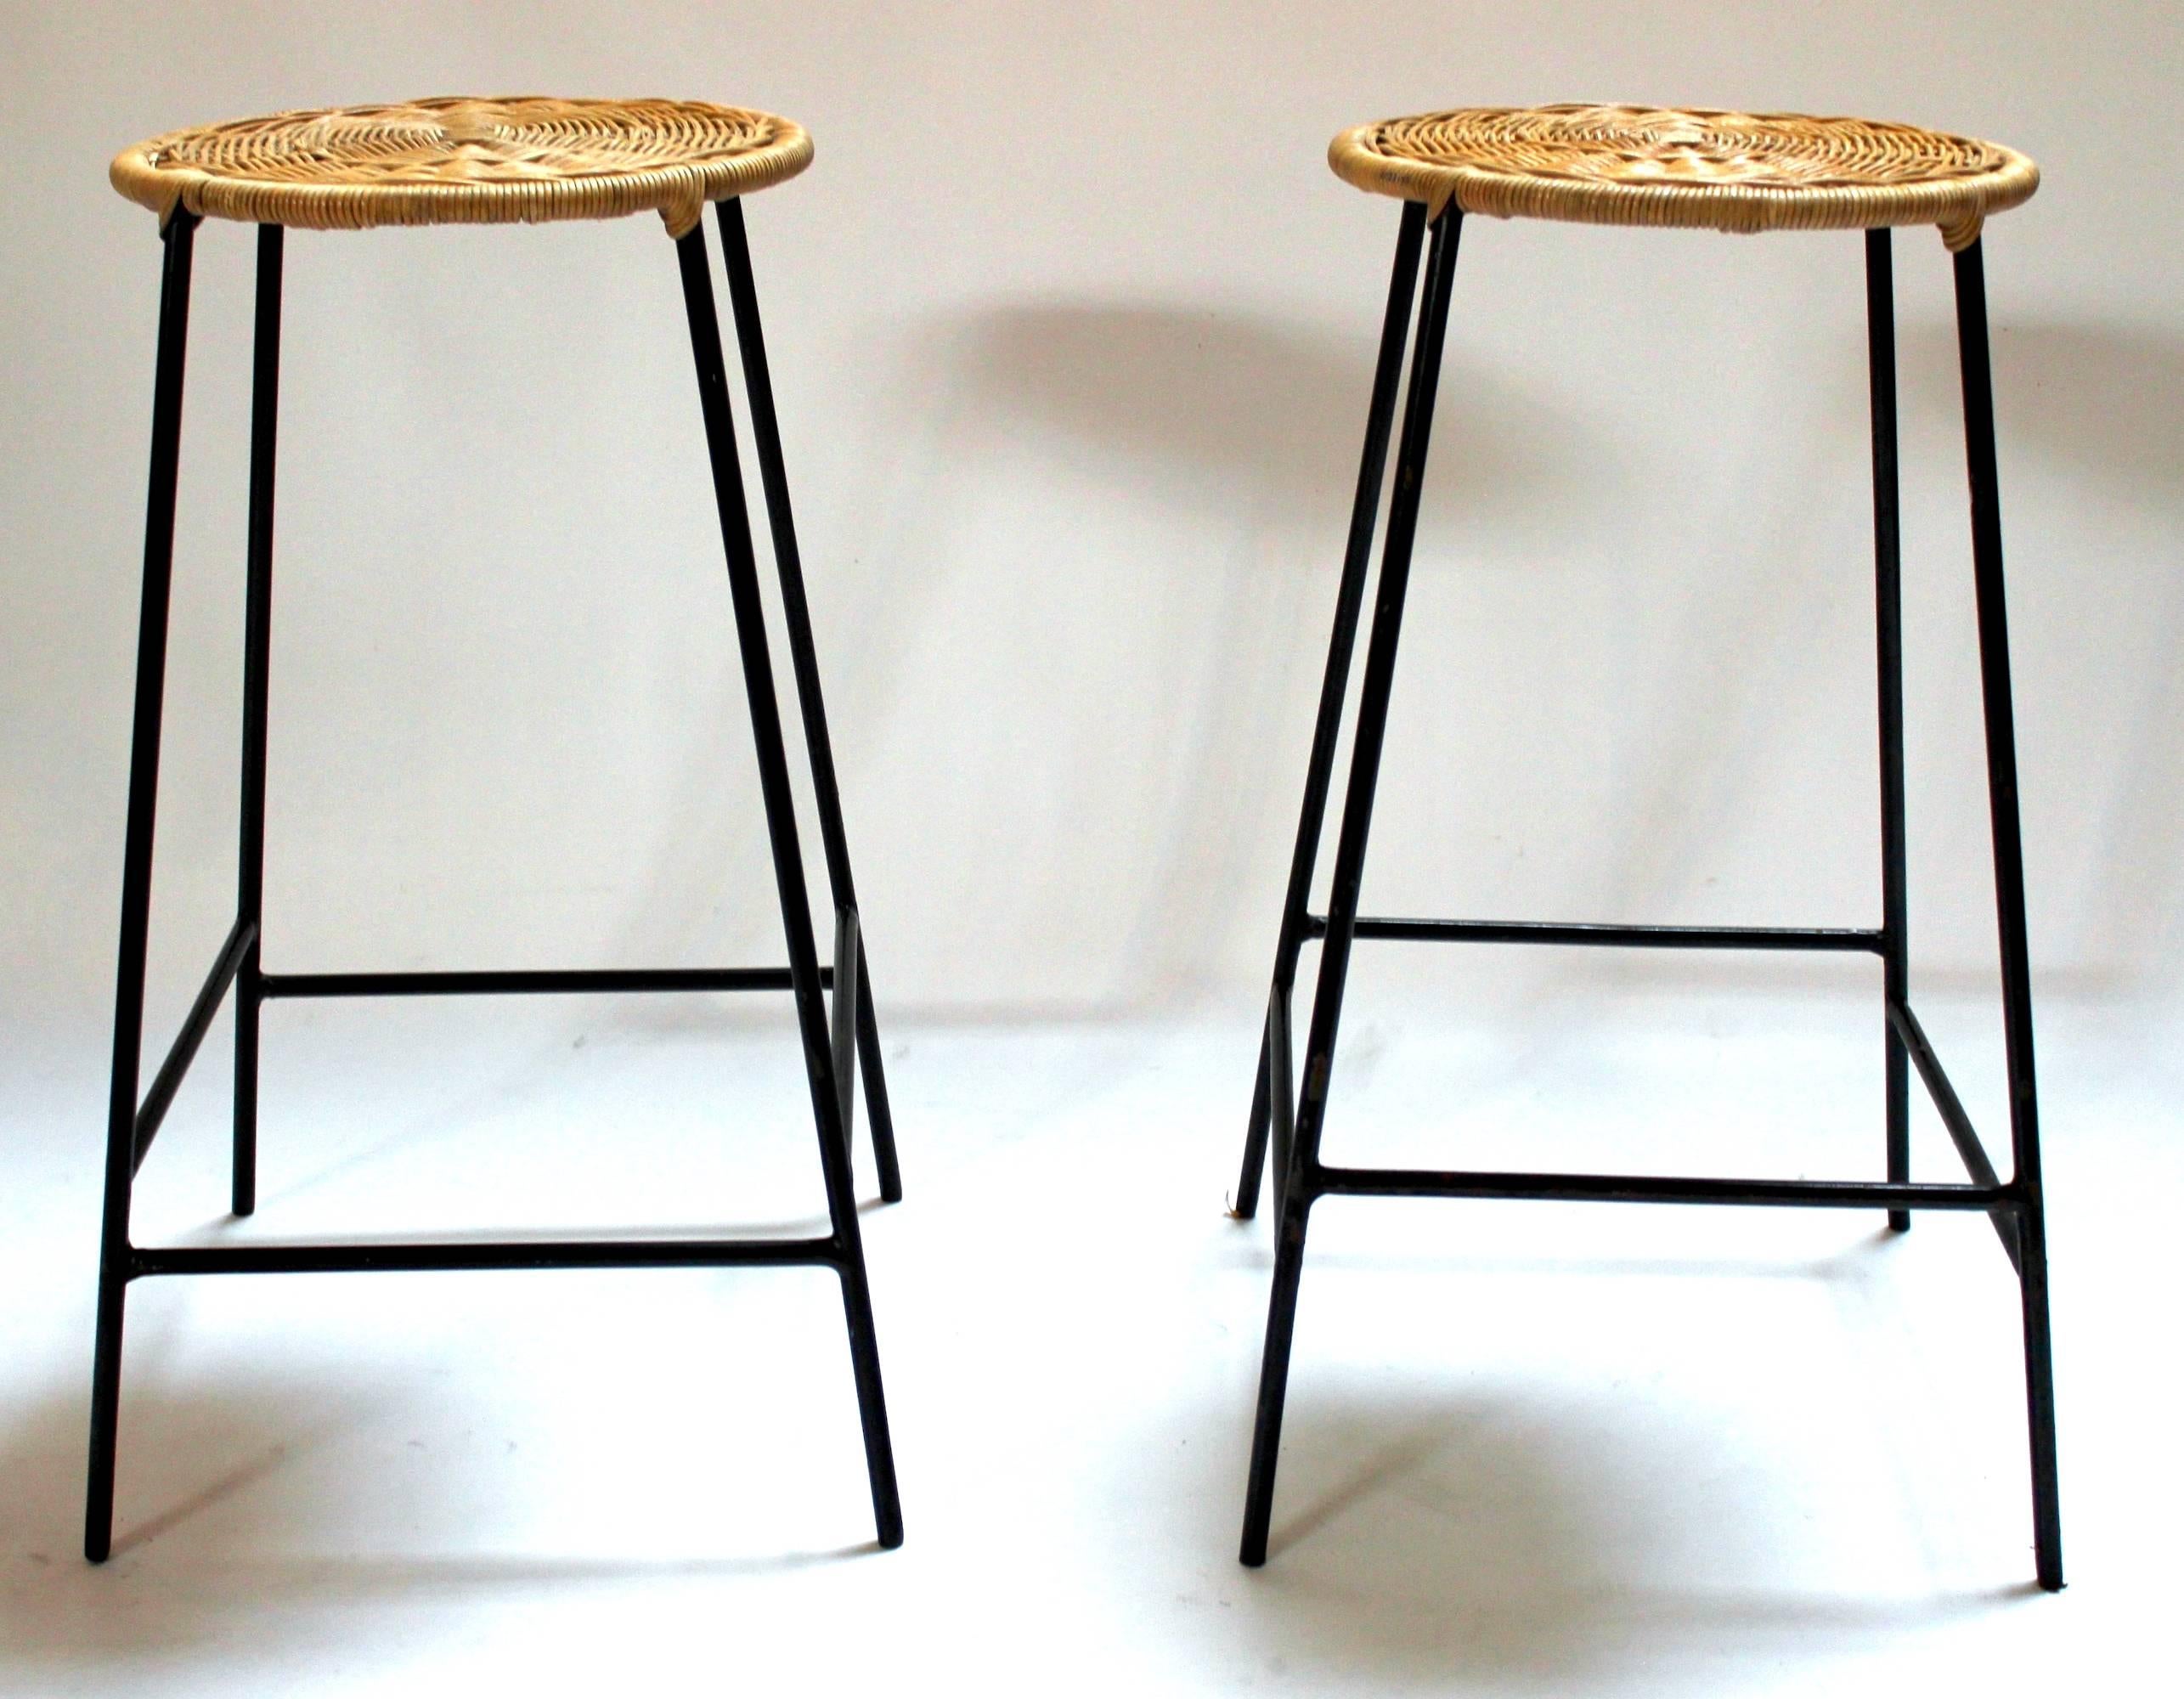 Pair of 1960s metal bar stools with woven wicker seats in the style of Arthur Umanoff. Price is for the pair.